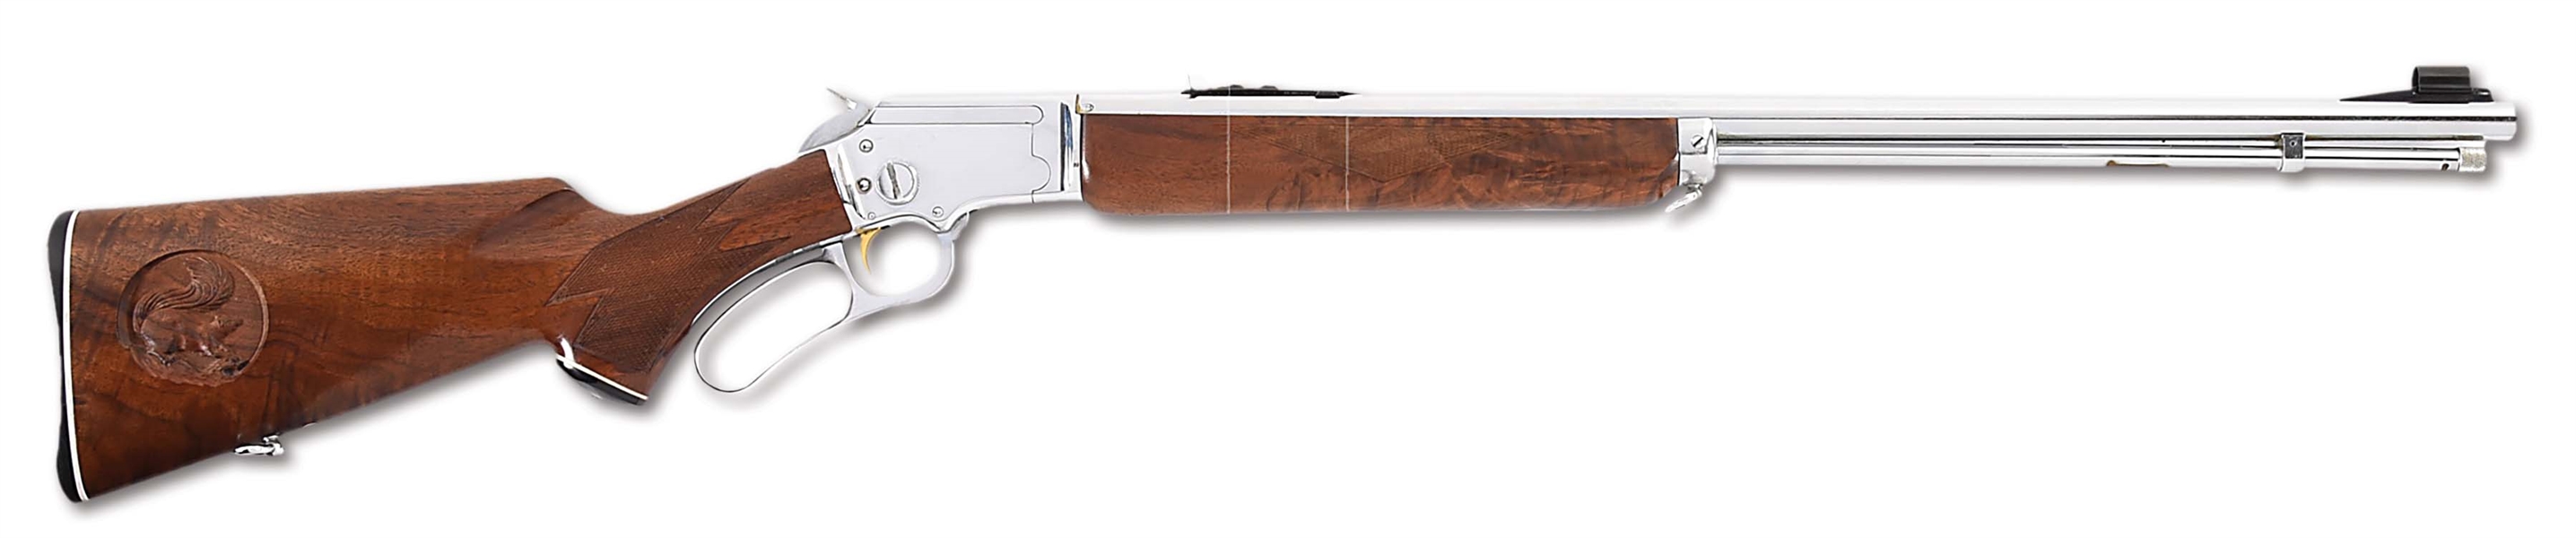 (C) RARE 90TH ANNIVERSARY MARLIN GOLDEN 39A-DL LEVER ACTION RIFLE.